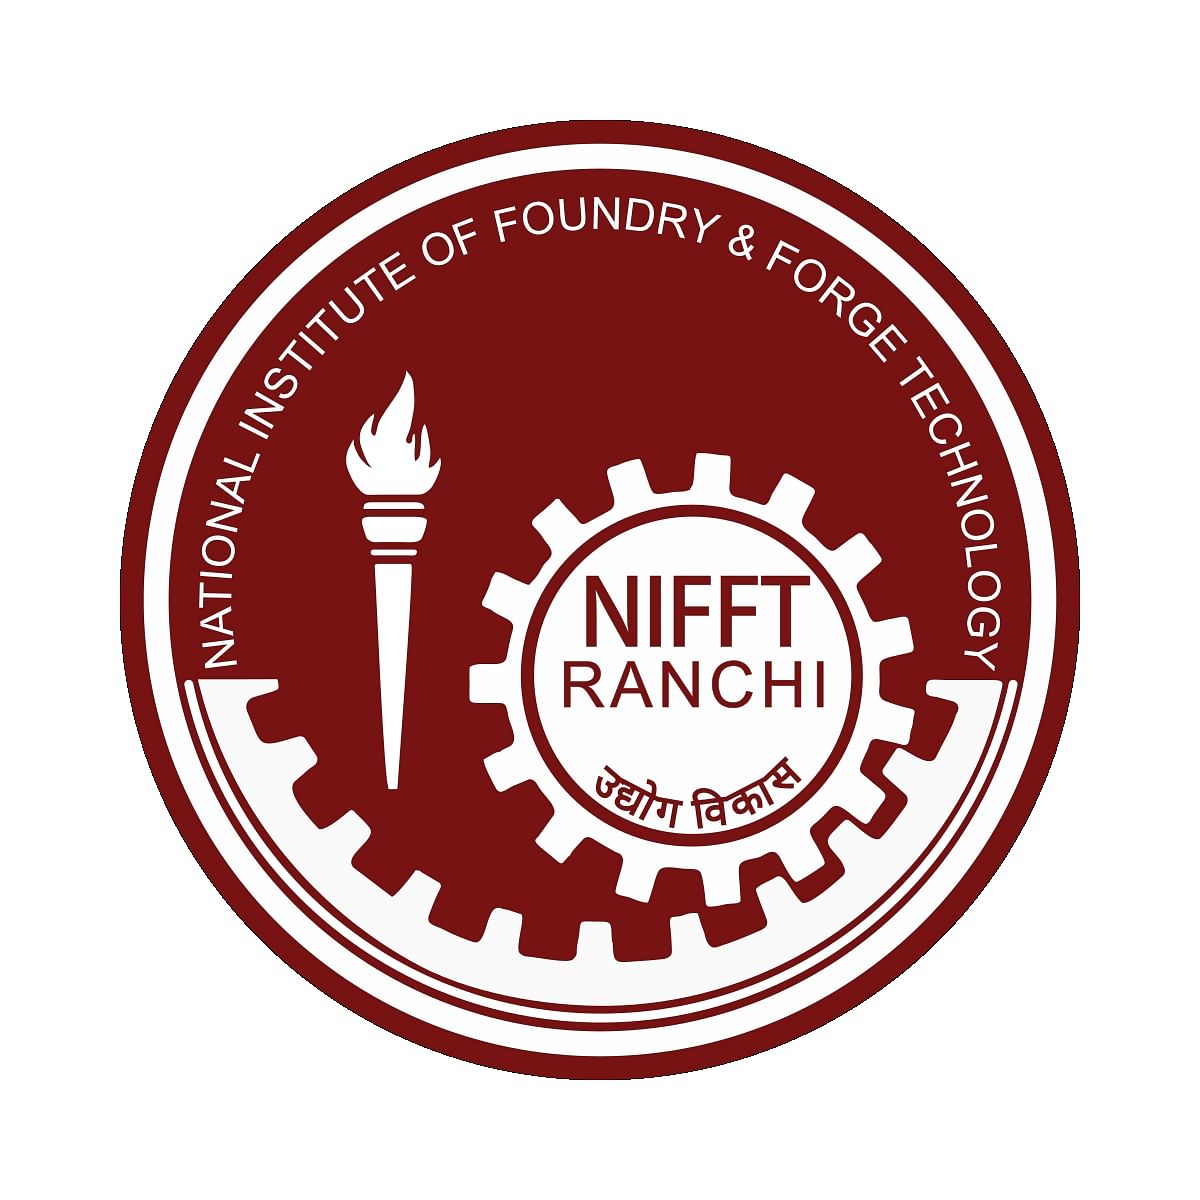 NIFFT Recruitment 2019: Applications Invited for 22 Assistant Professor Vacancy, Know How to Apply